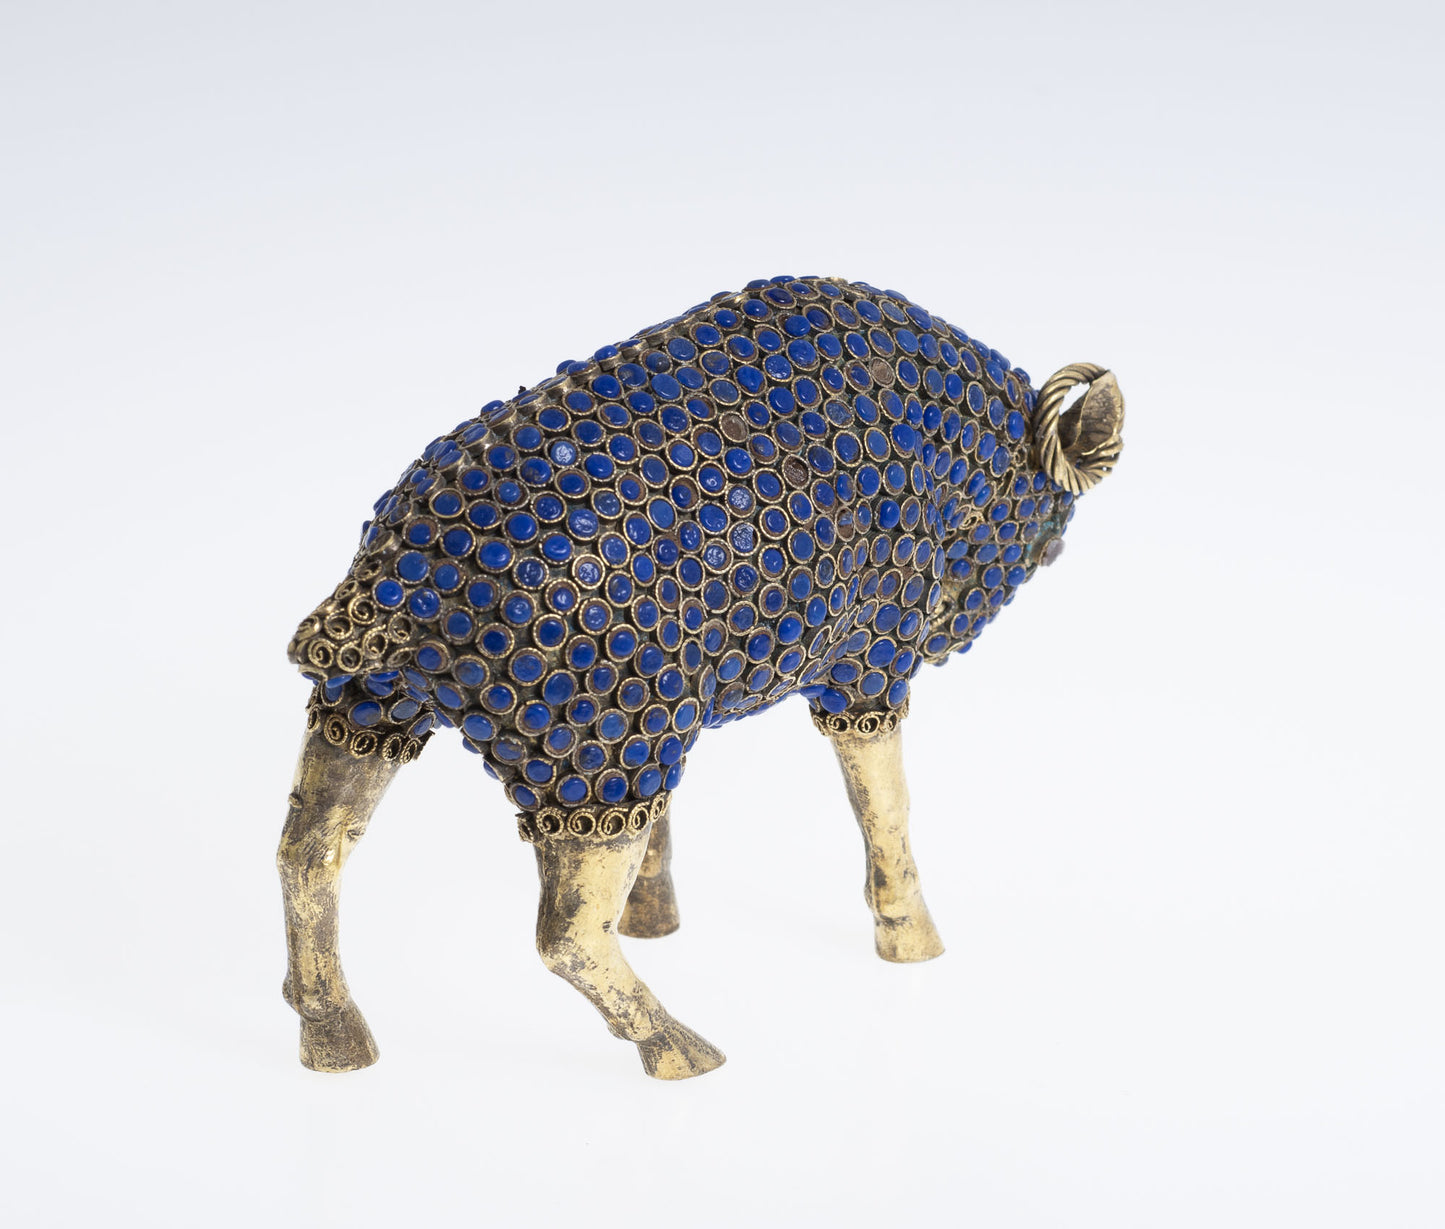 Vintage Hand Made Nepalese Figure/Model of a Ram with Lapis Lazuli Cabochons (2944)